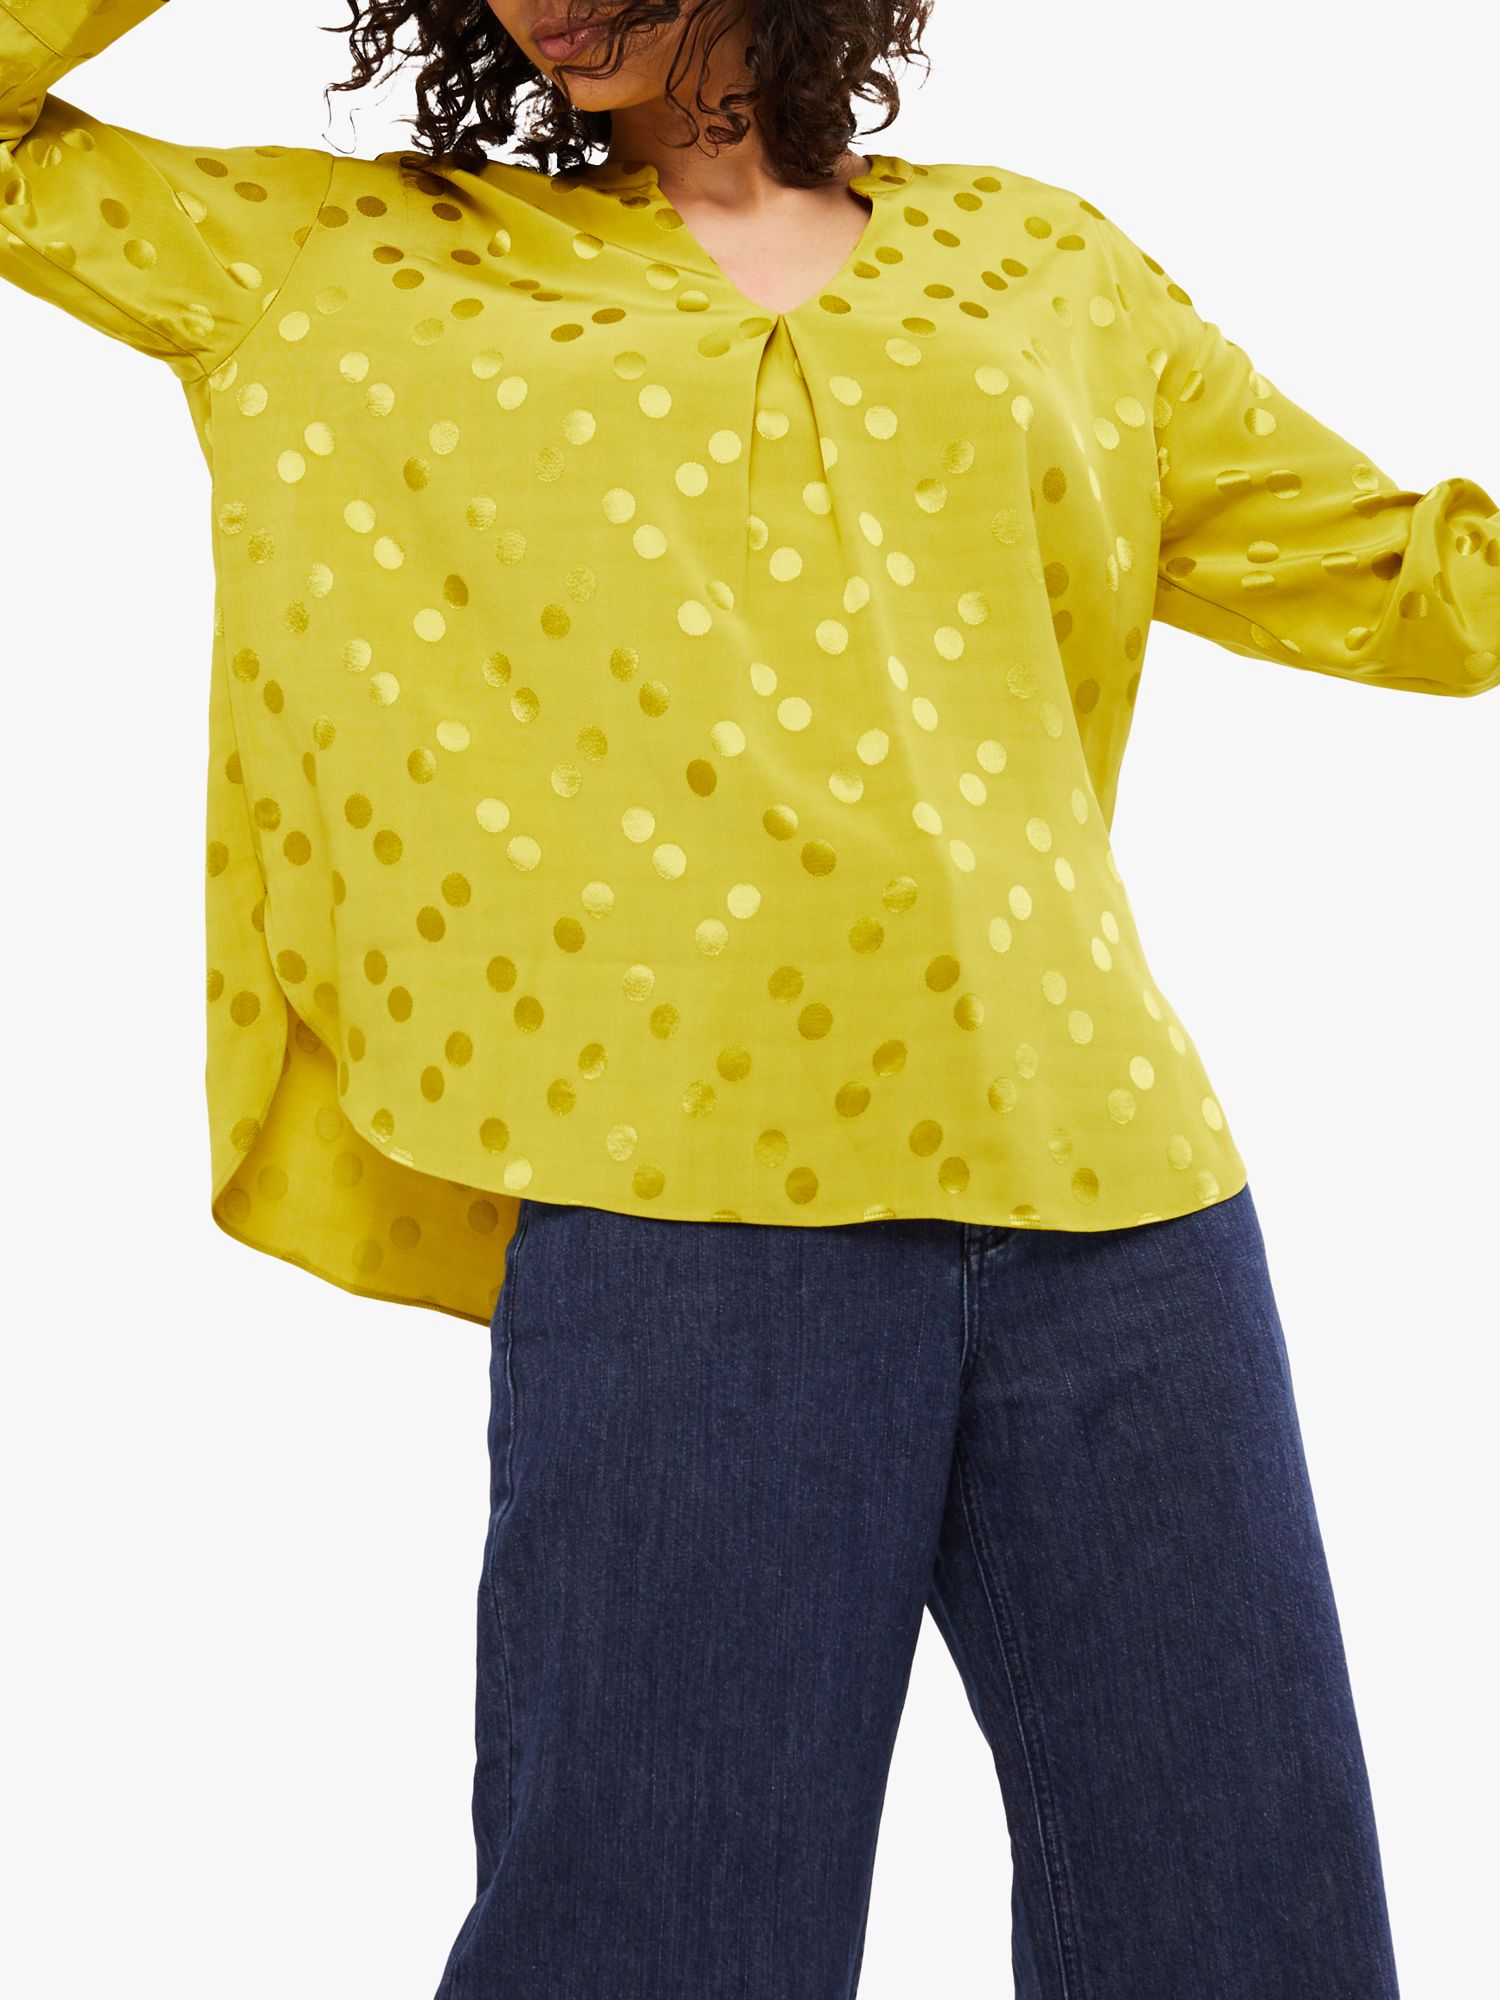 White Stuff Evergreen Abstract Print Top, Sunny Chartreuse